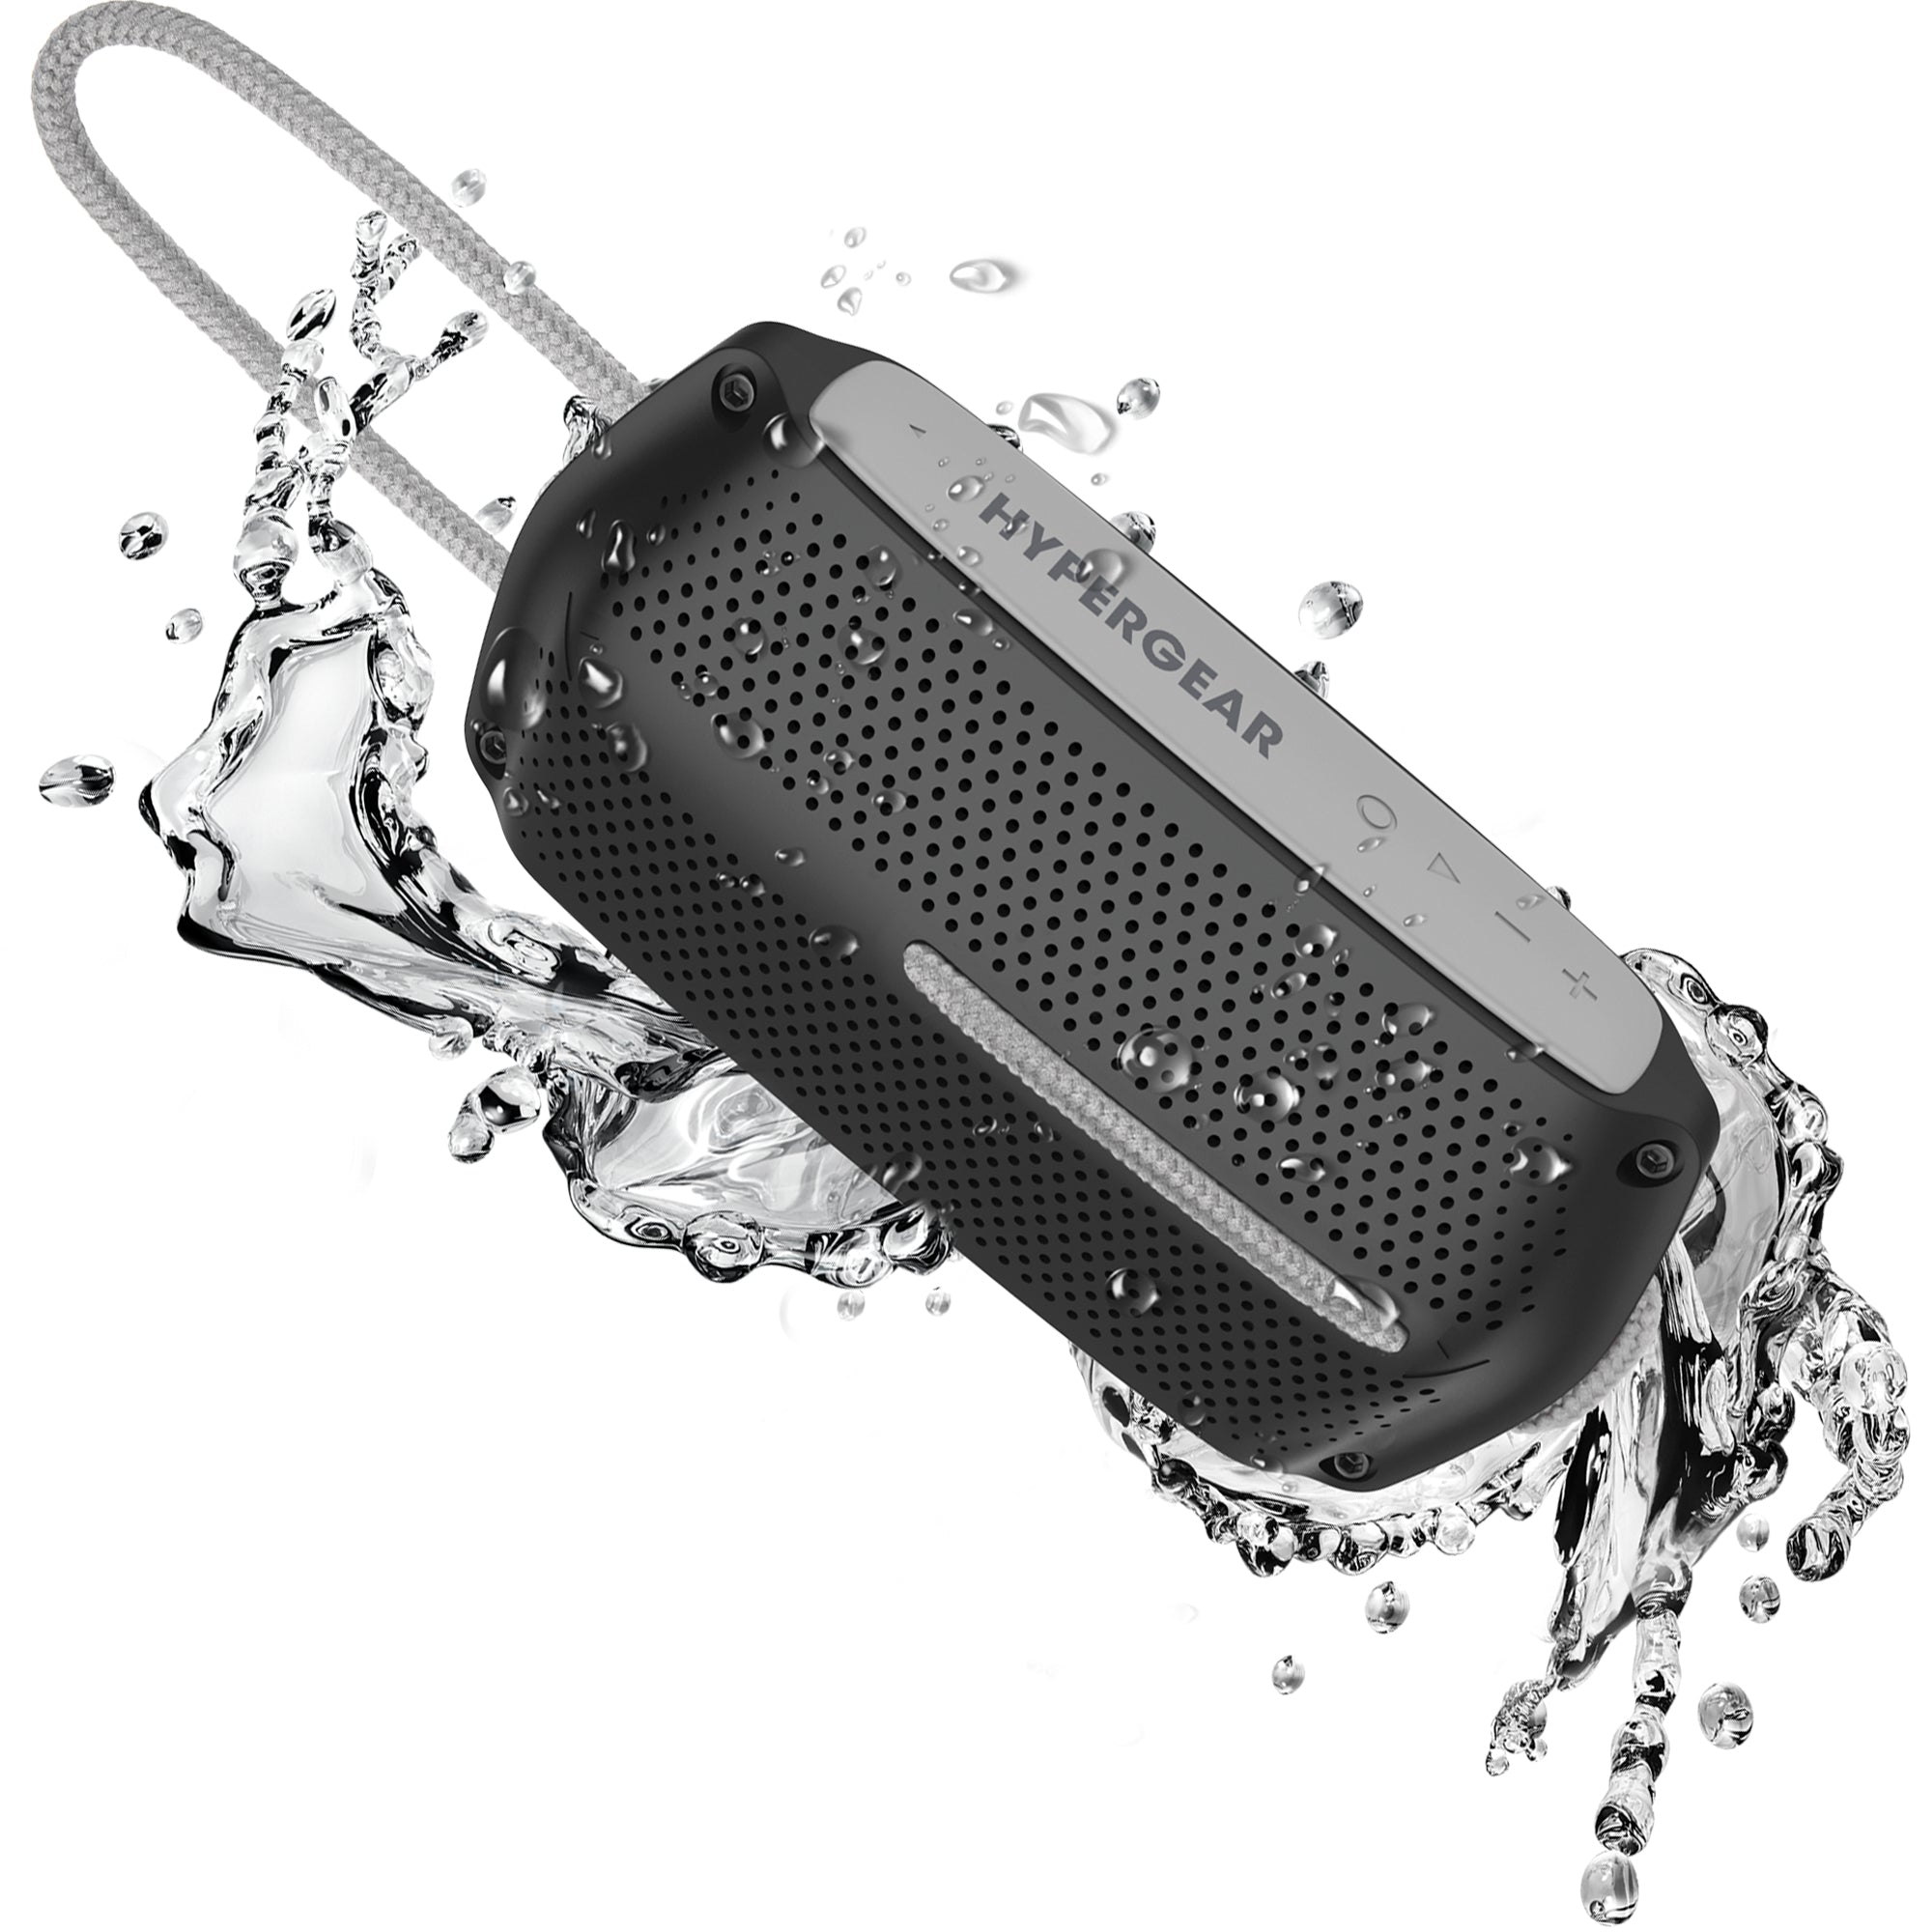 I Put This Speaker's Waterproof Claims to the Test and Came Away Impressed